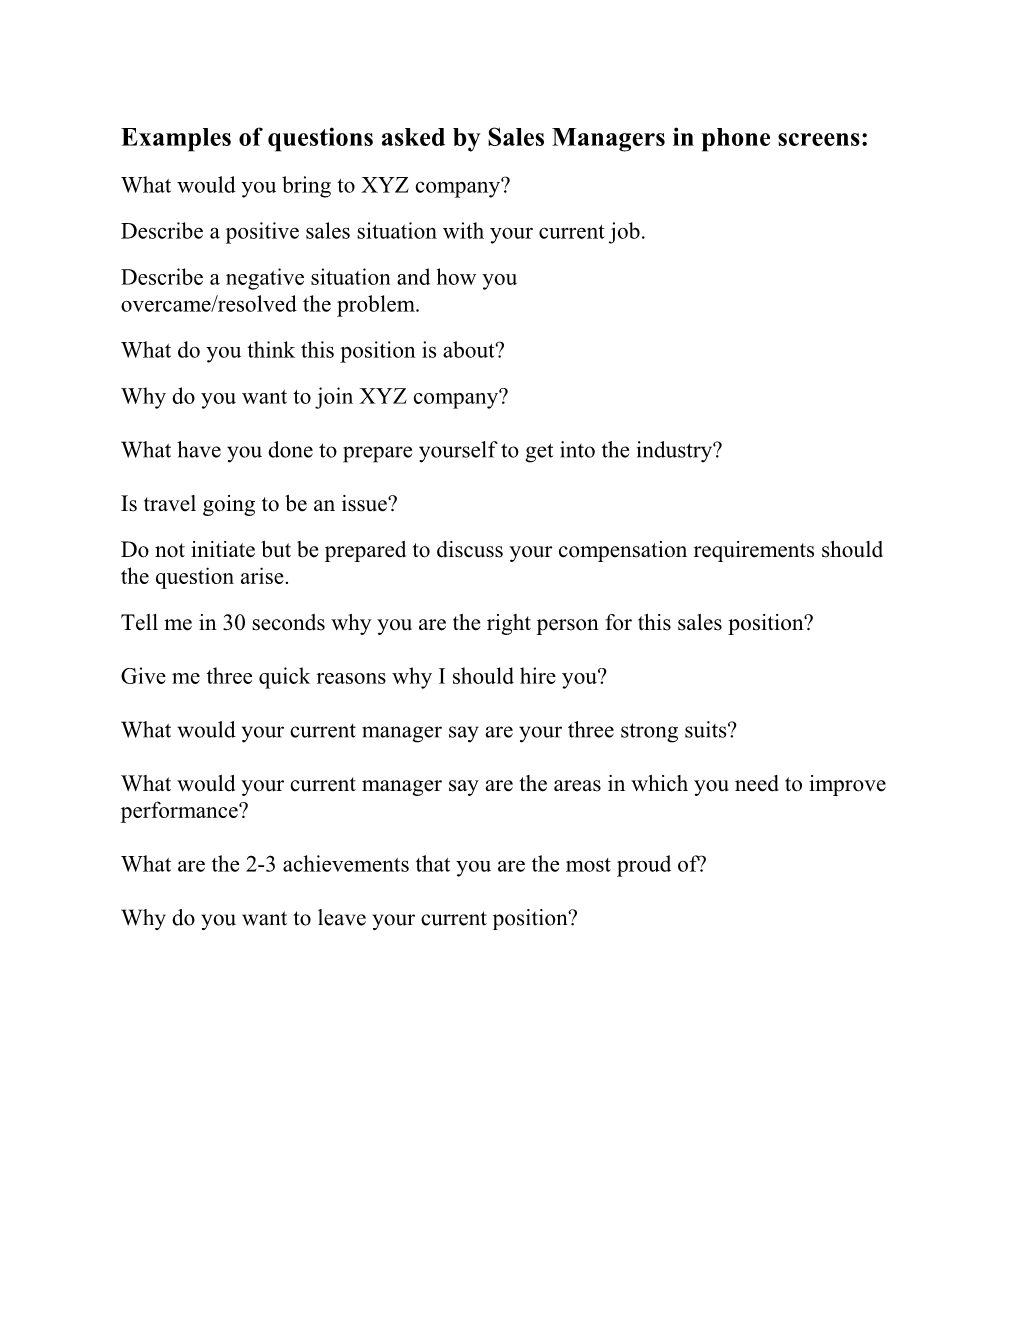 Phone Screen Questions Asked by Sales Managers